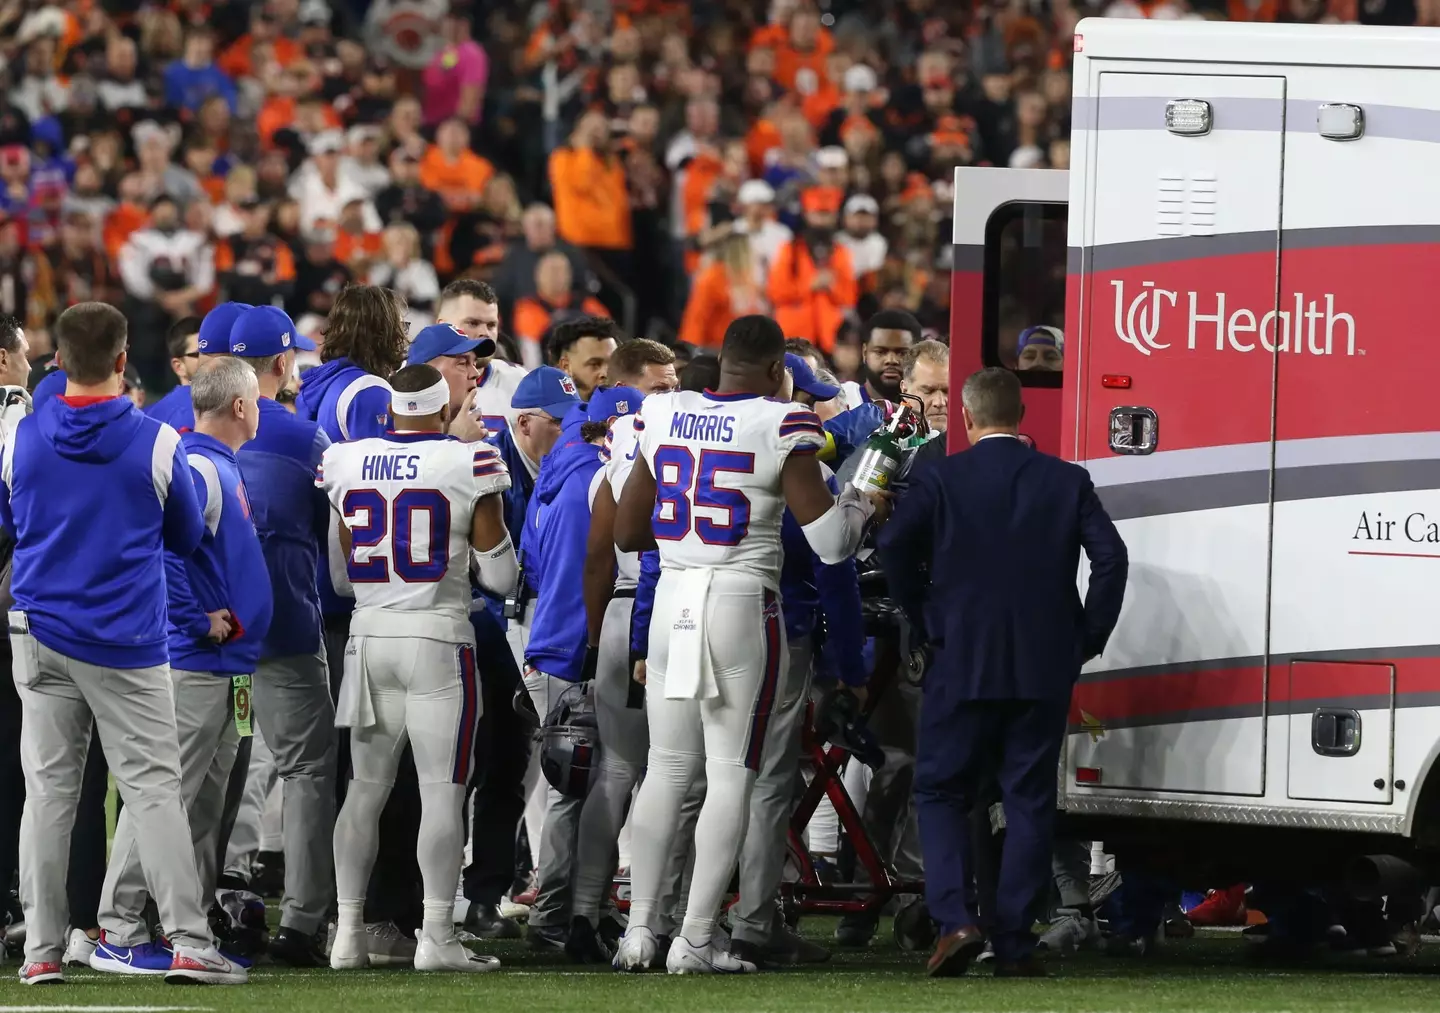 Buffalo Bills players surround their teammate as he was escorted into an ambulance.